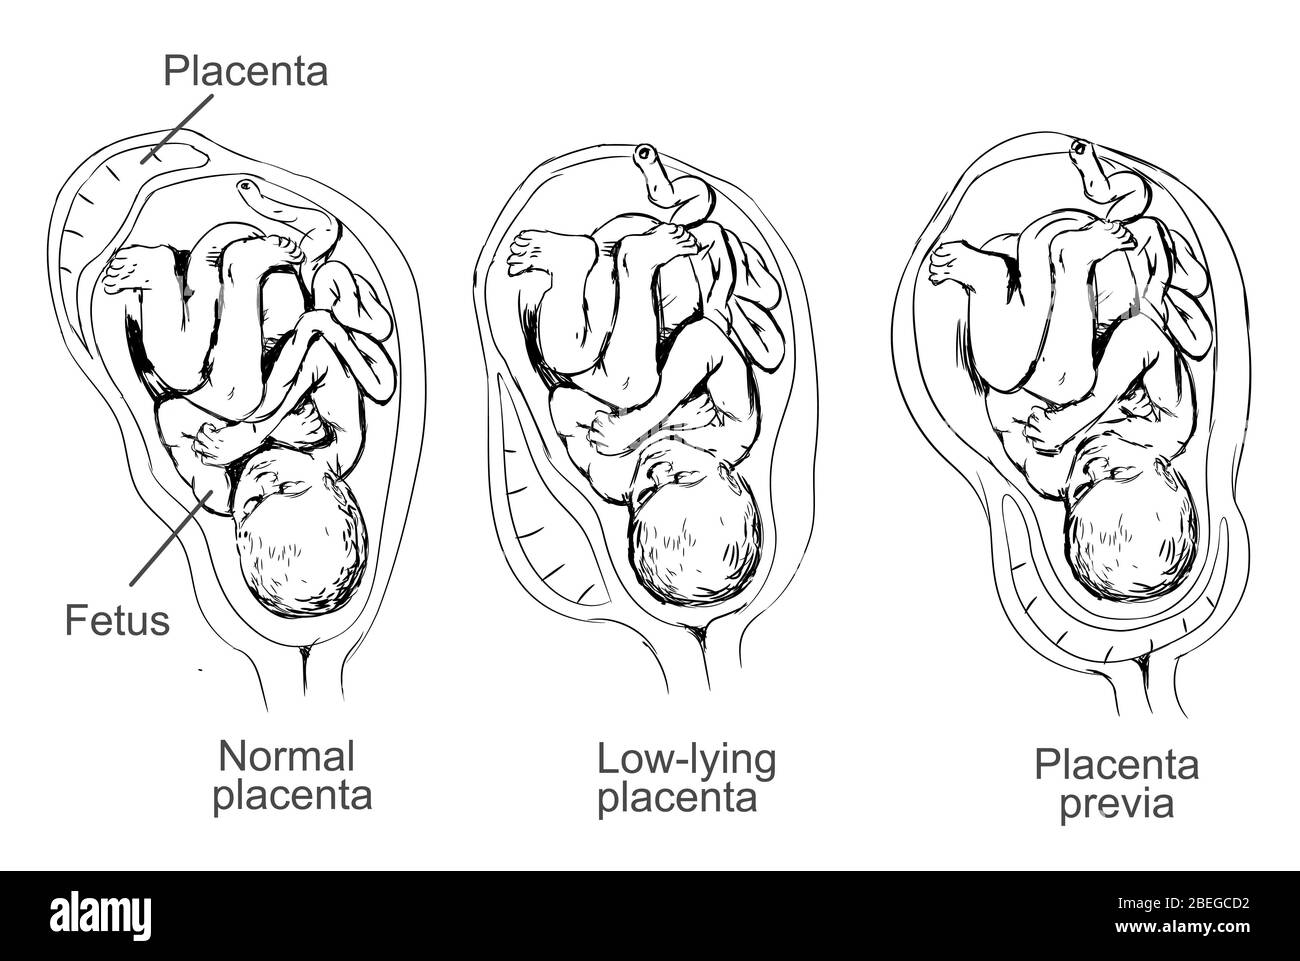 Illustration of placenta previa, a condition in which the placenta lies low in the uterus and covers the cervix, causing pregnancy complications. Stock Photo